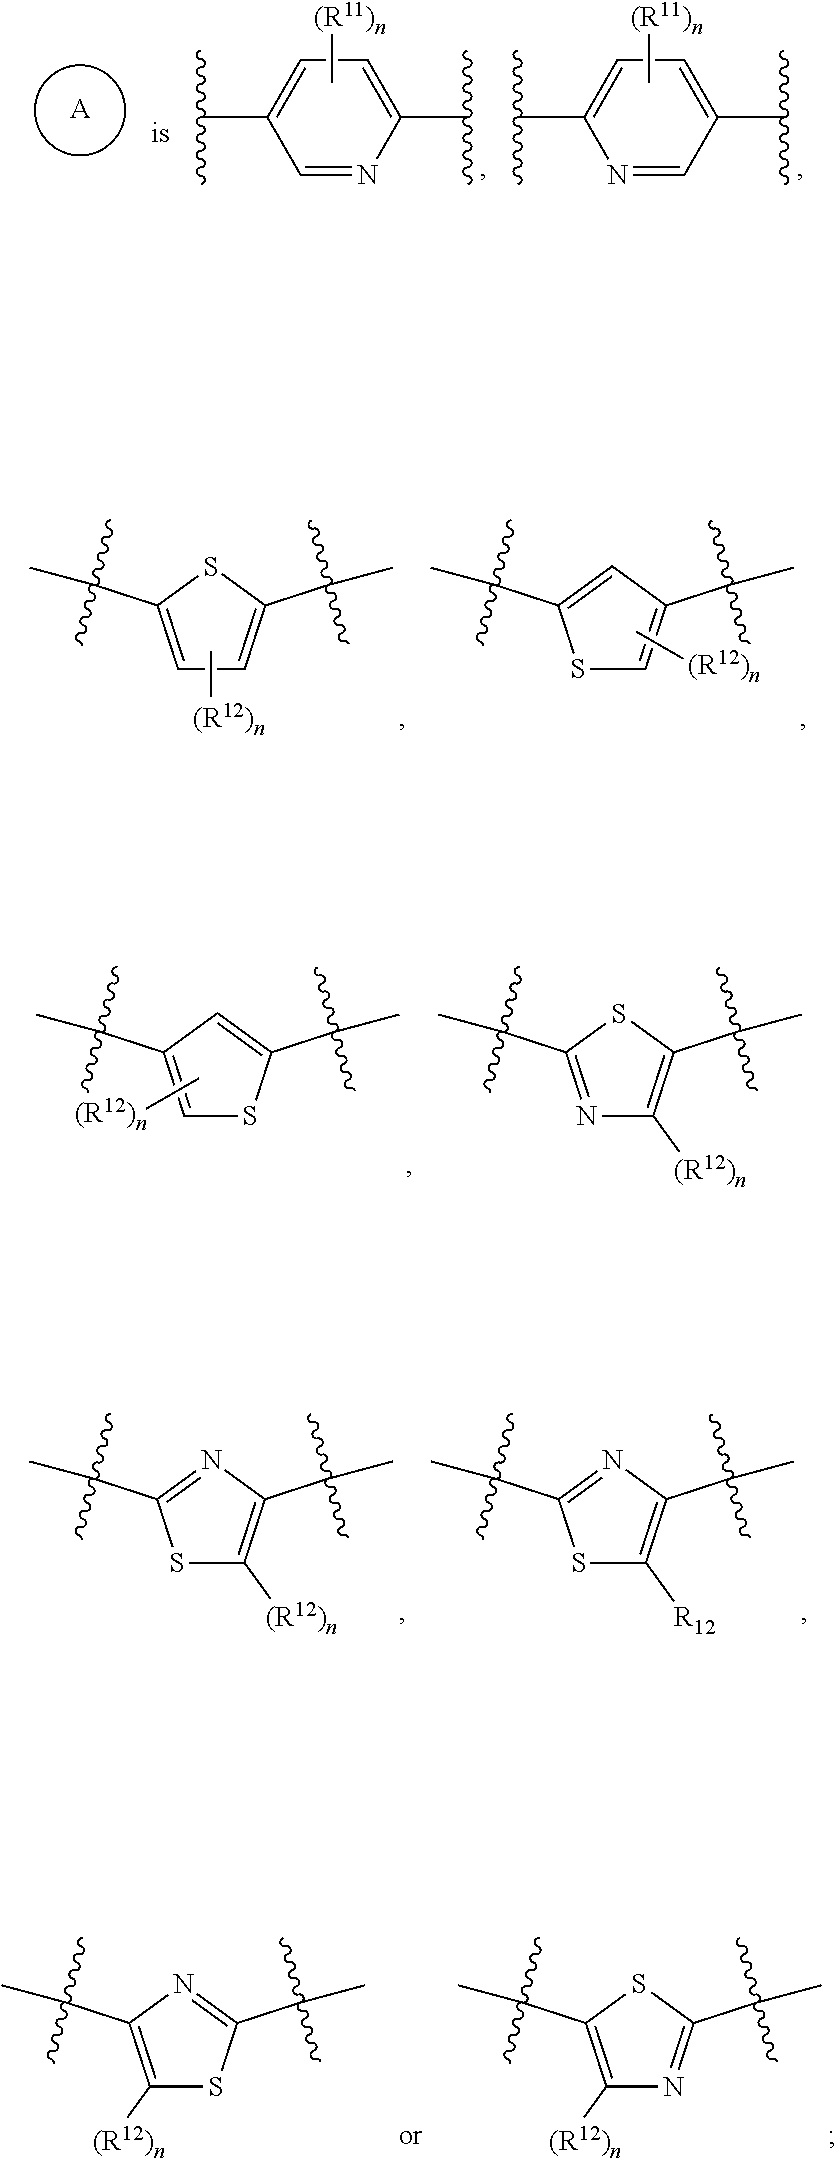 Heteroaryl-substituted sulfonamide compounds and their use as sodium channel inhibitors